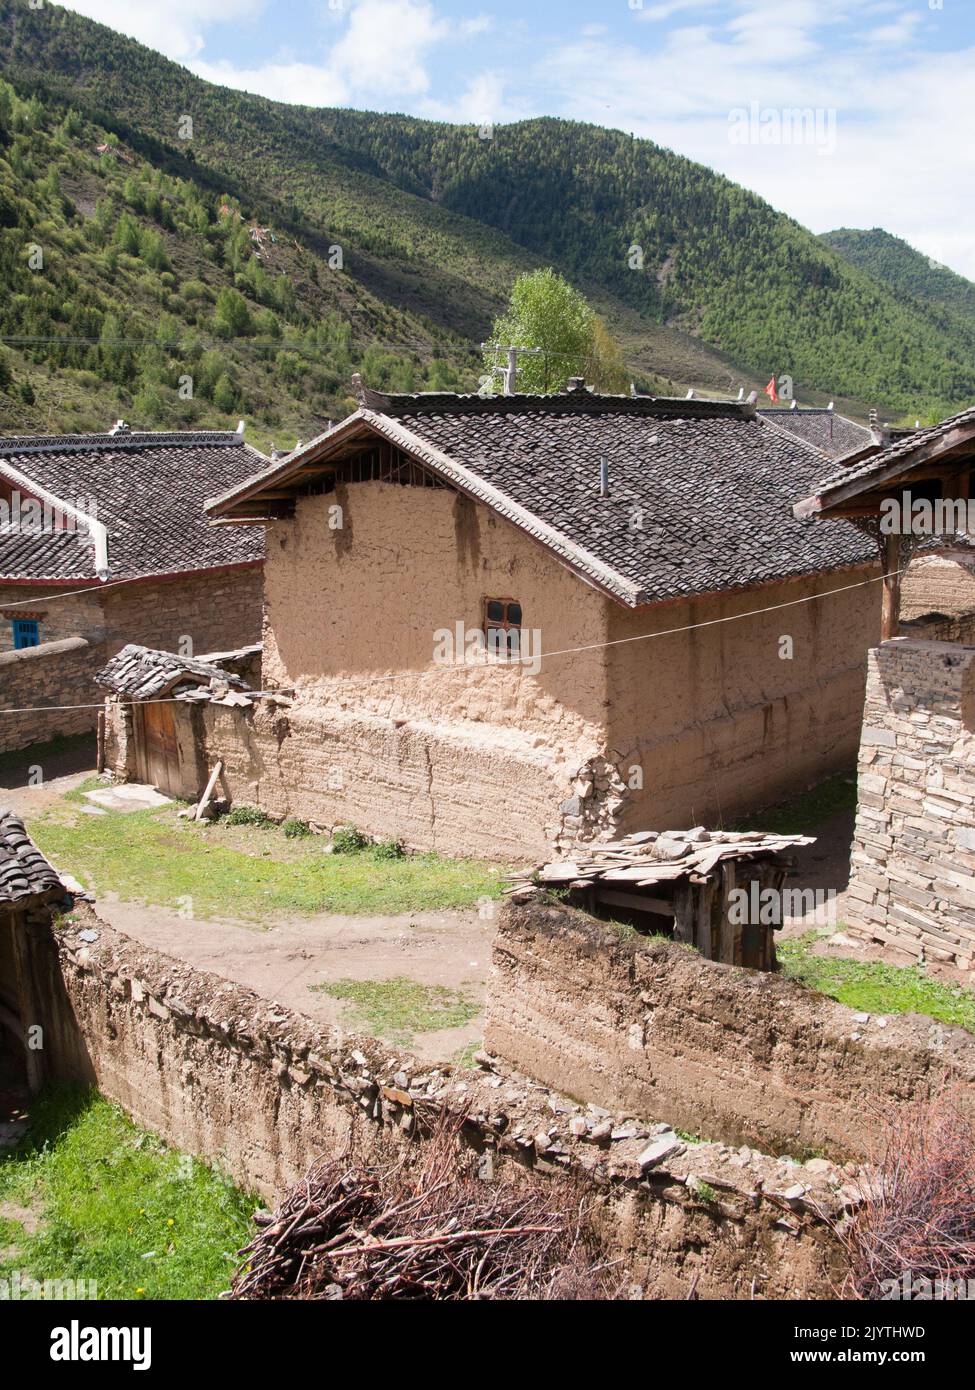 Domestic houses / residential housing built in a small village (lived in by ethnic Tibetan people) in the hills east of Songpan ancient town in northern Sichuan province, China. PRC. (126) Stock Photo